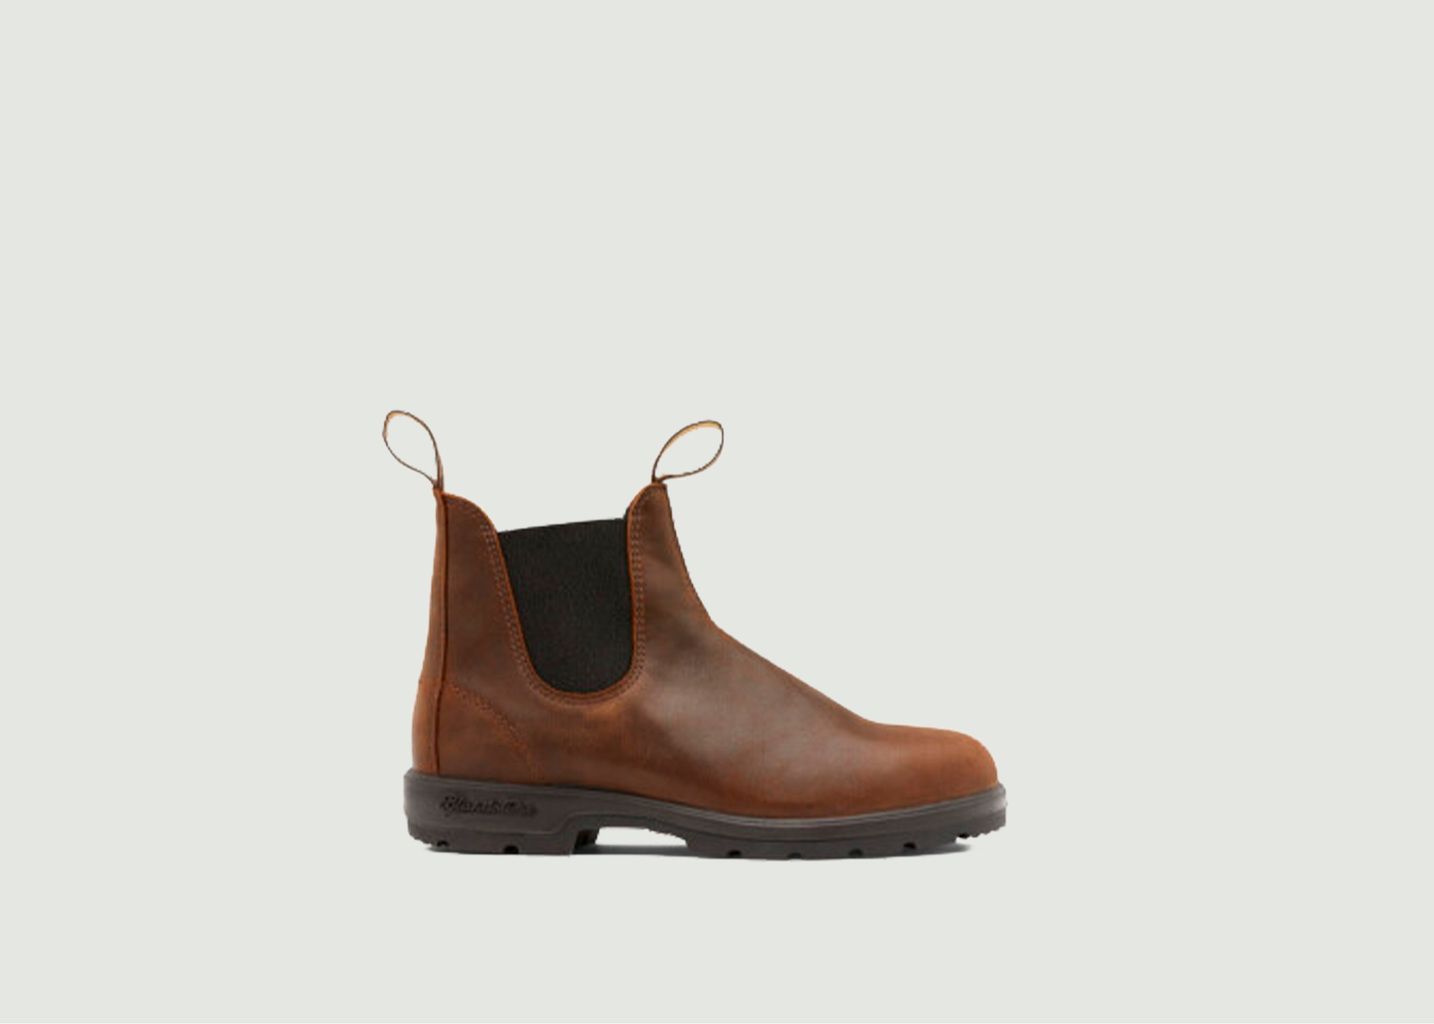 Blundstone Chelsea Boots 1609